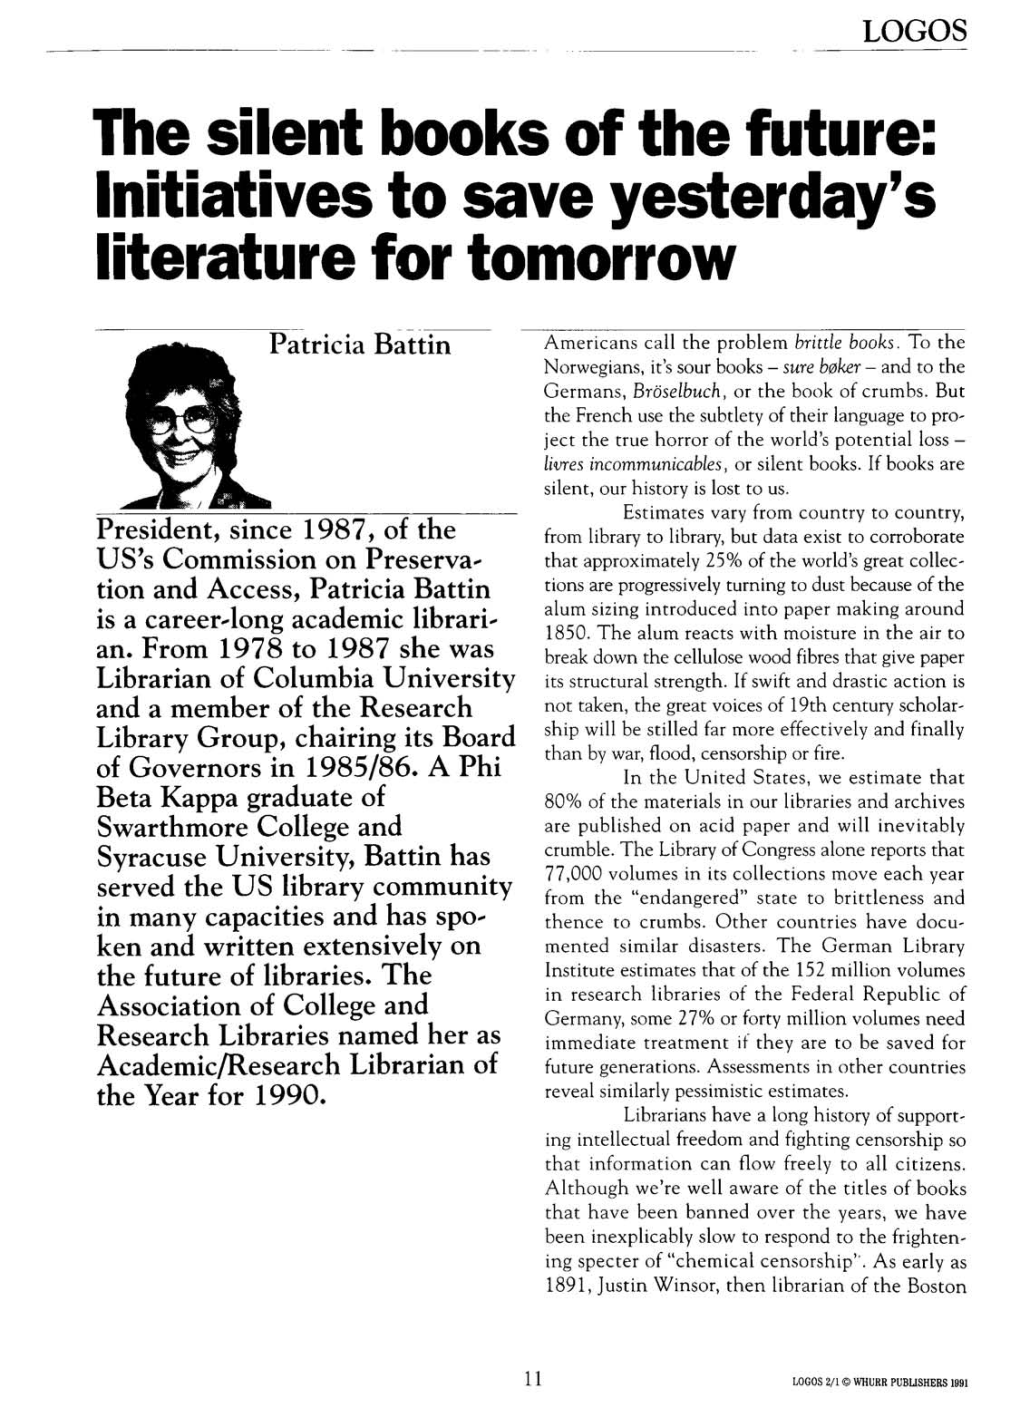 Hie Silent Boolcs of the Future: Initiatives to Save Yesterday's Literature for Tomorrow